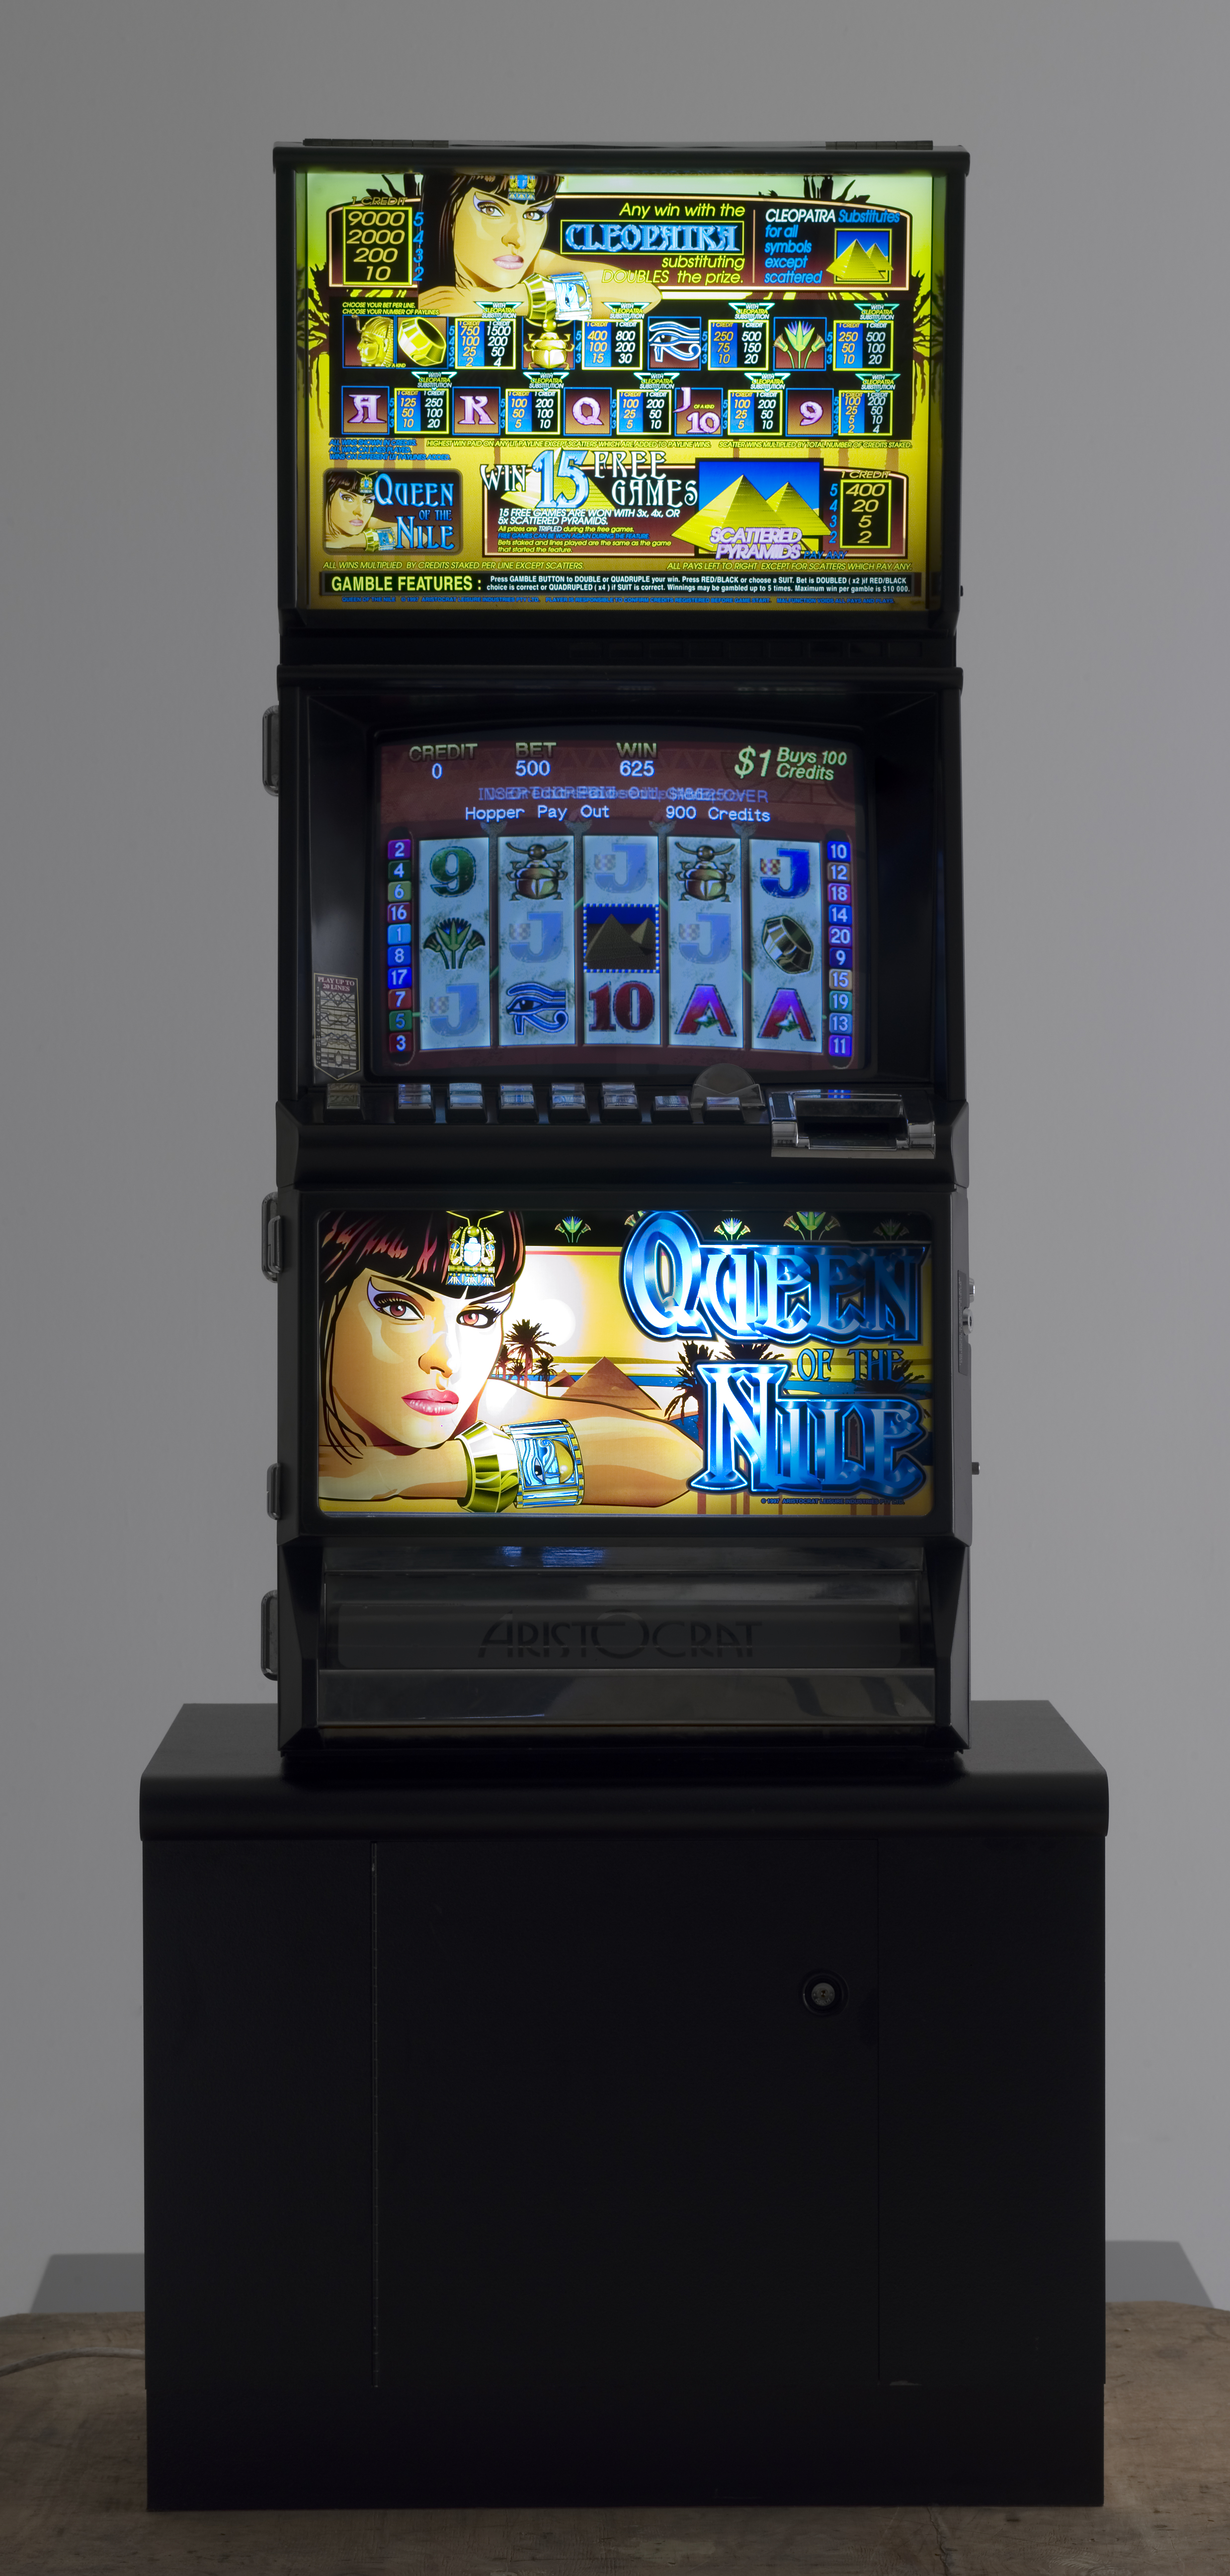 Poker machine, 'Queen of the Nile'.